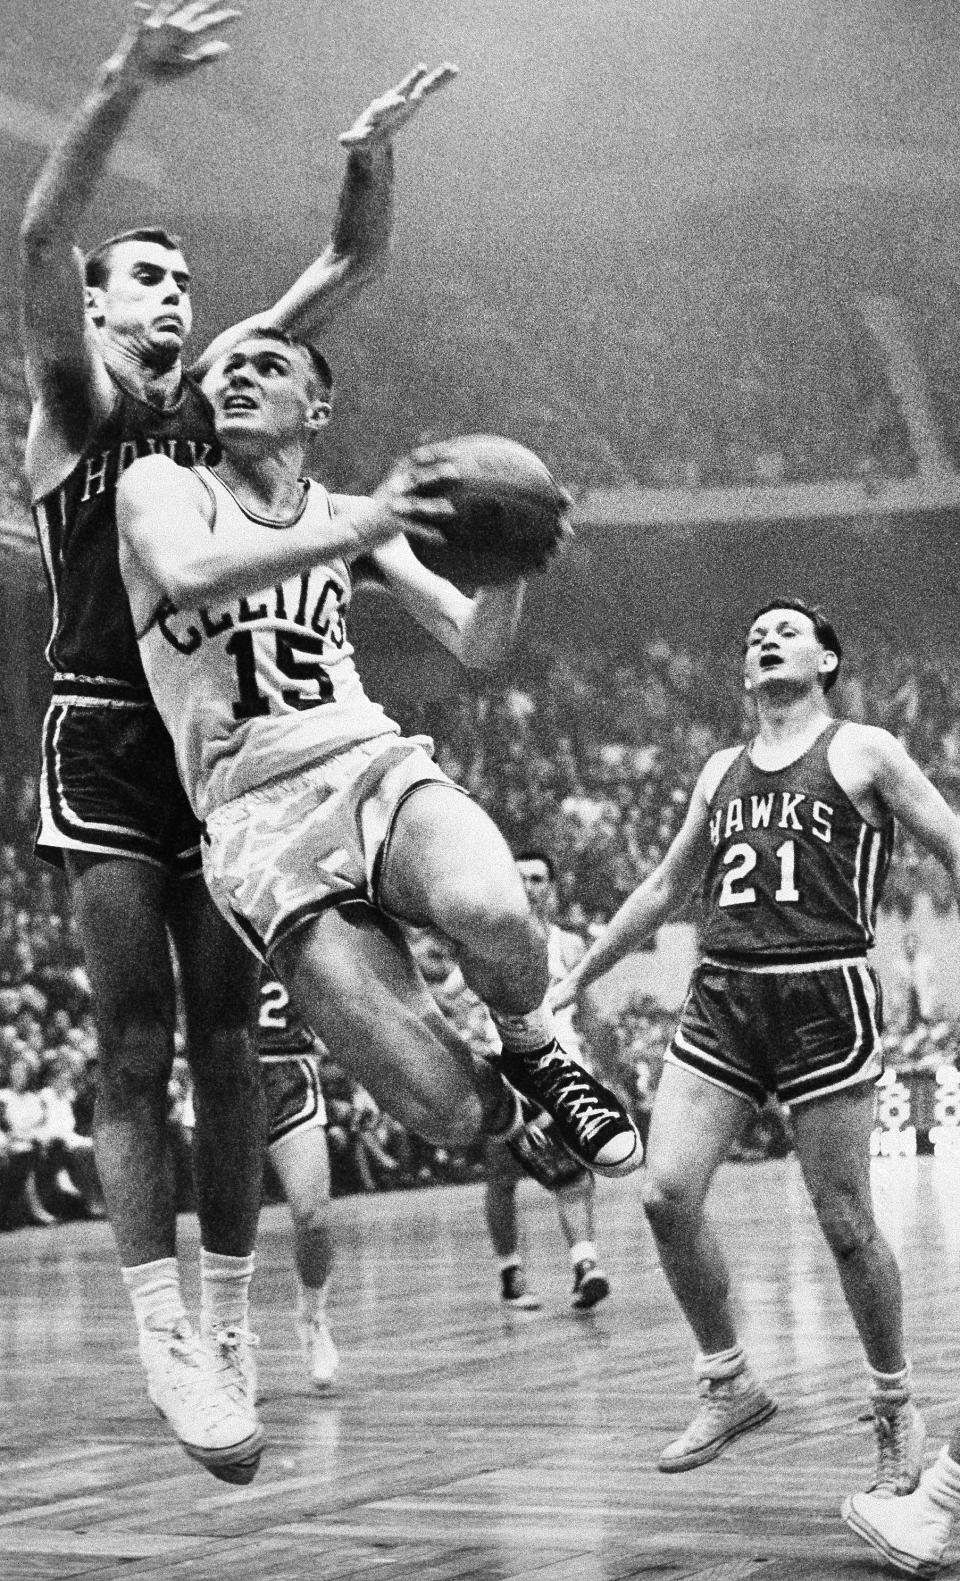 Tommy Heinsohn, (15) of the Boston Celtics leaps to score as Bob Pettit, left, of the <a class="link " href="https://sports.yahoo.com/nba/teams/atlanta/" data-i13n="sec:content-canvas;subsec:anchor_text;elm:context_link" data-ylk="slk:St. Louis Hawks;sec:content-canvas;subsec:anchor_text;elm:context_link;itc:0">St. Louis Hawks</a> attempts to block the play in their National Basketball Association playoff game at Boston Garden on April 10, 1958. Watching the play is Jack McMahon (21) of the Hawks. AP Photo/J. Walter Green